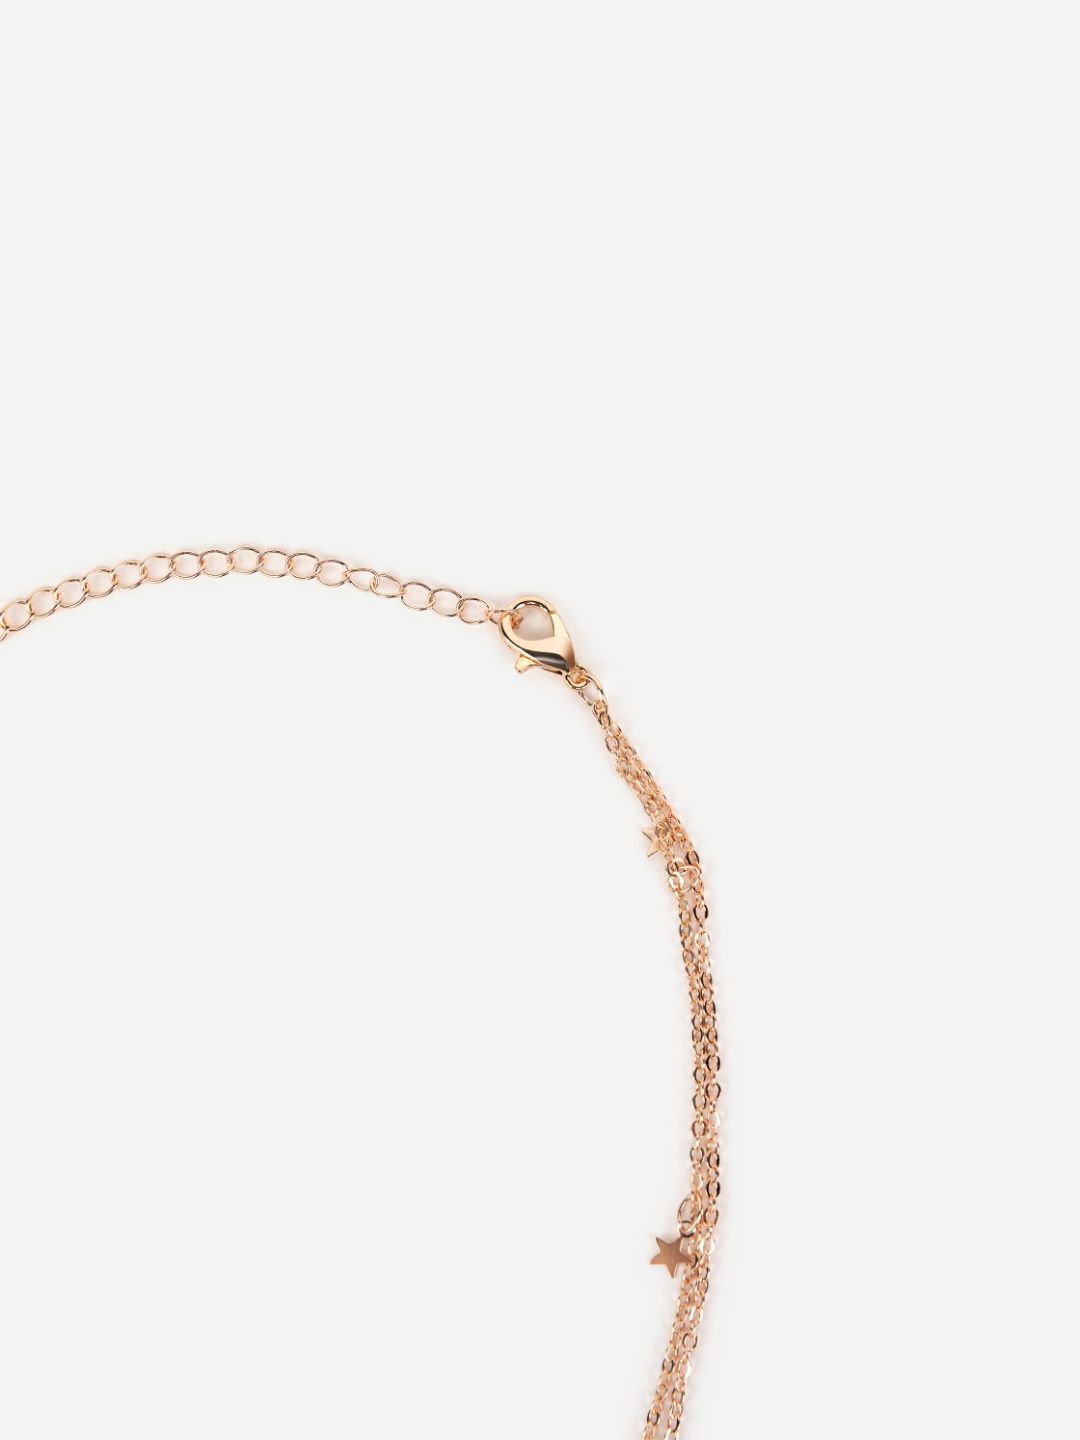 Layered Star Solitaire Drop Rose Gold-Plated Necklace